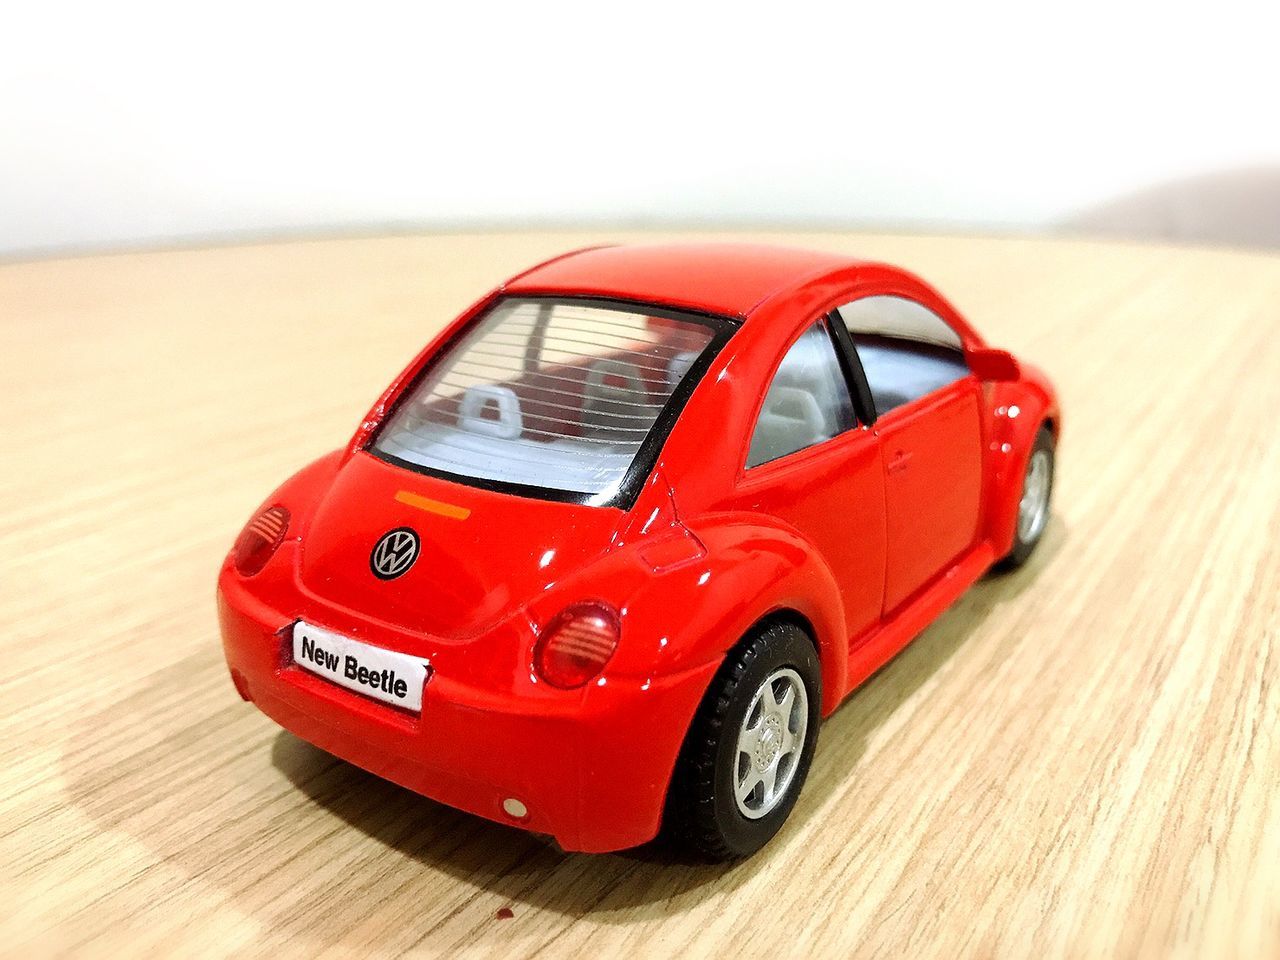 CLOSE-UP OF TOY CAR AGAINST RED SKY